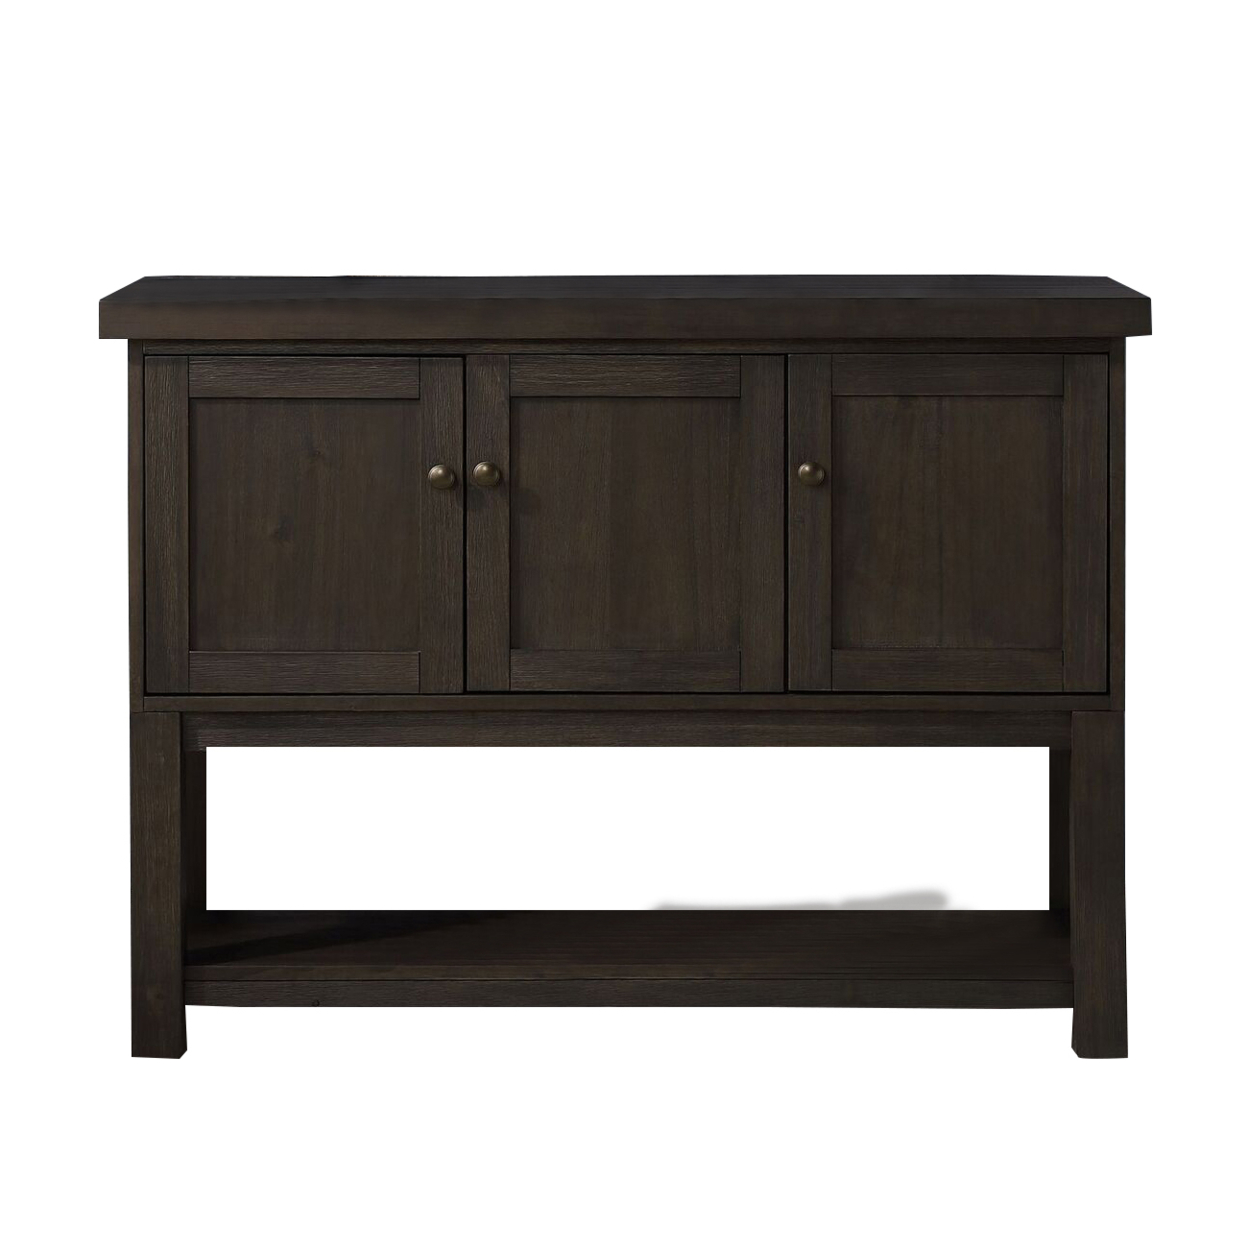 Transitional Style Server With 3 Doors And Open Bottom Shelf, Brown- Saltoro Sherpi